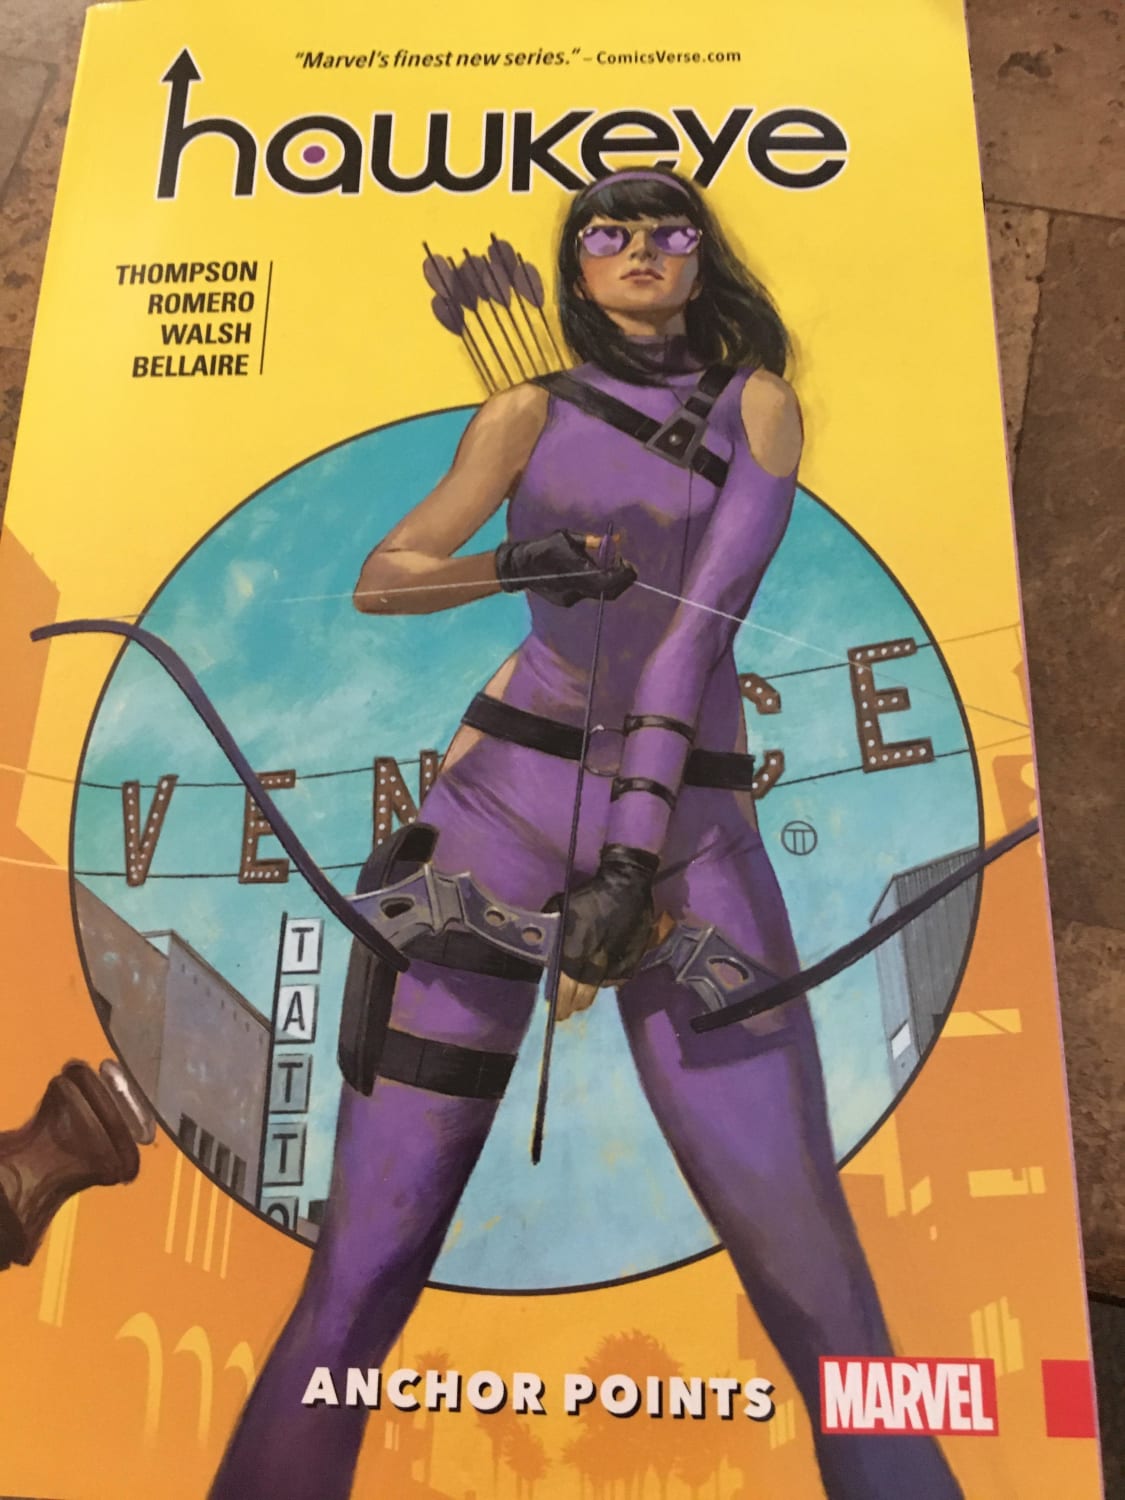 Got this in the mail and read it already, it’s so good, can’t wait til I have the cash for the next few volumes, hoping she’s done well in Hawkeye